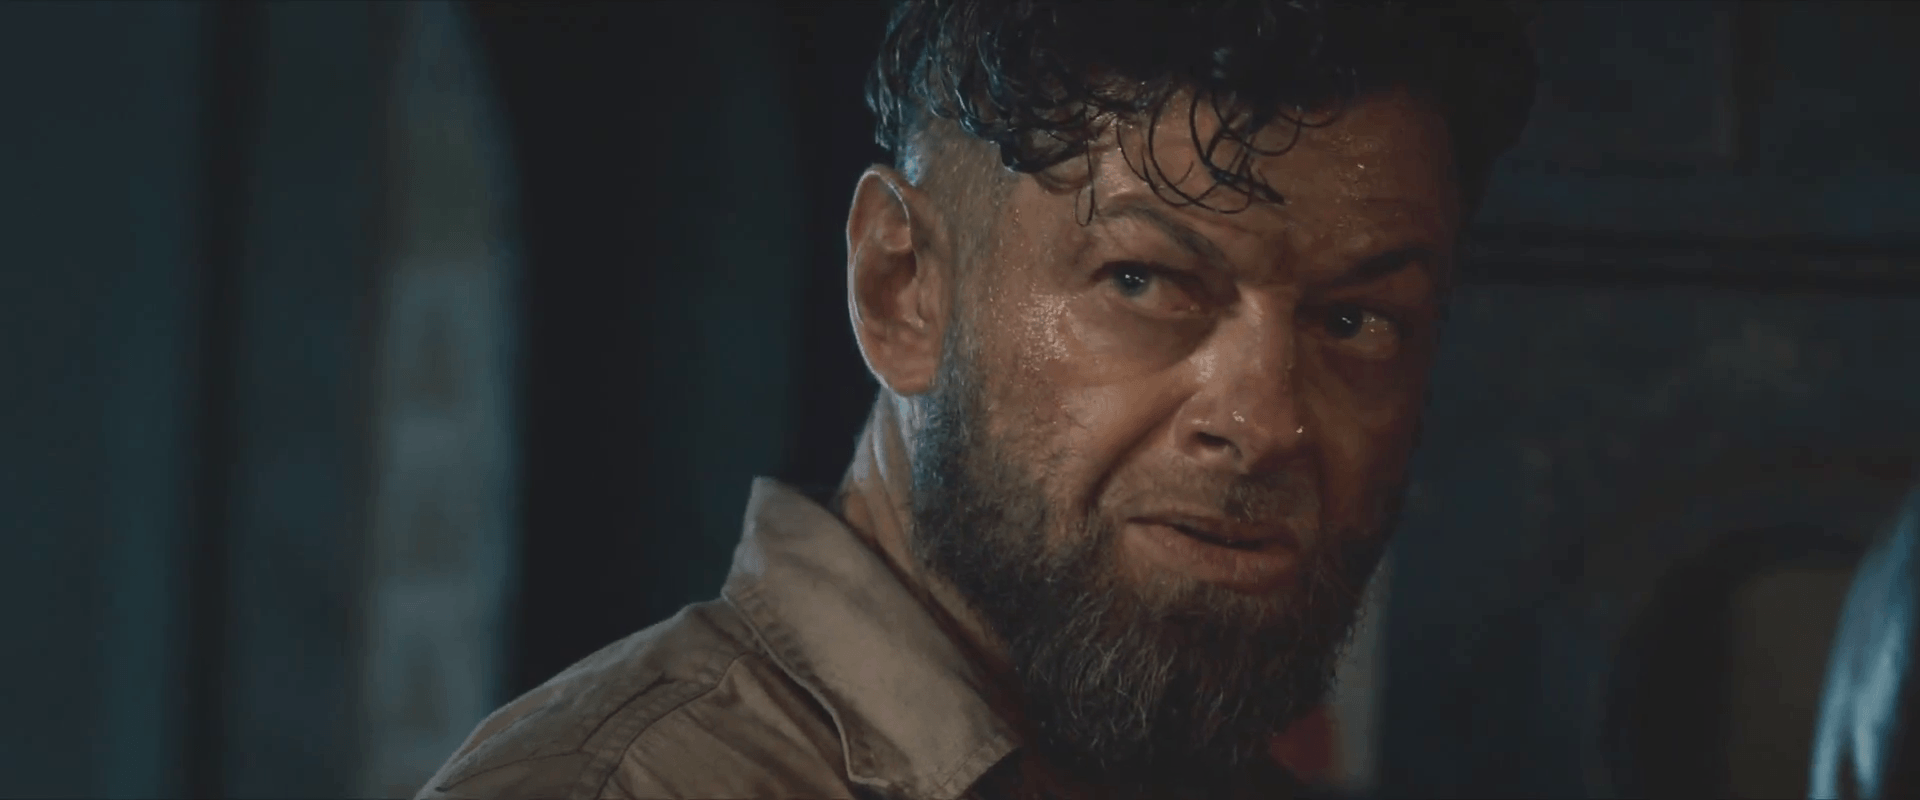 The Jungle Book: Andy Serkis Says His Version Is Darker